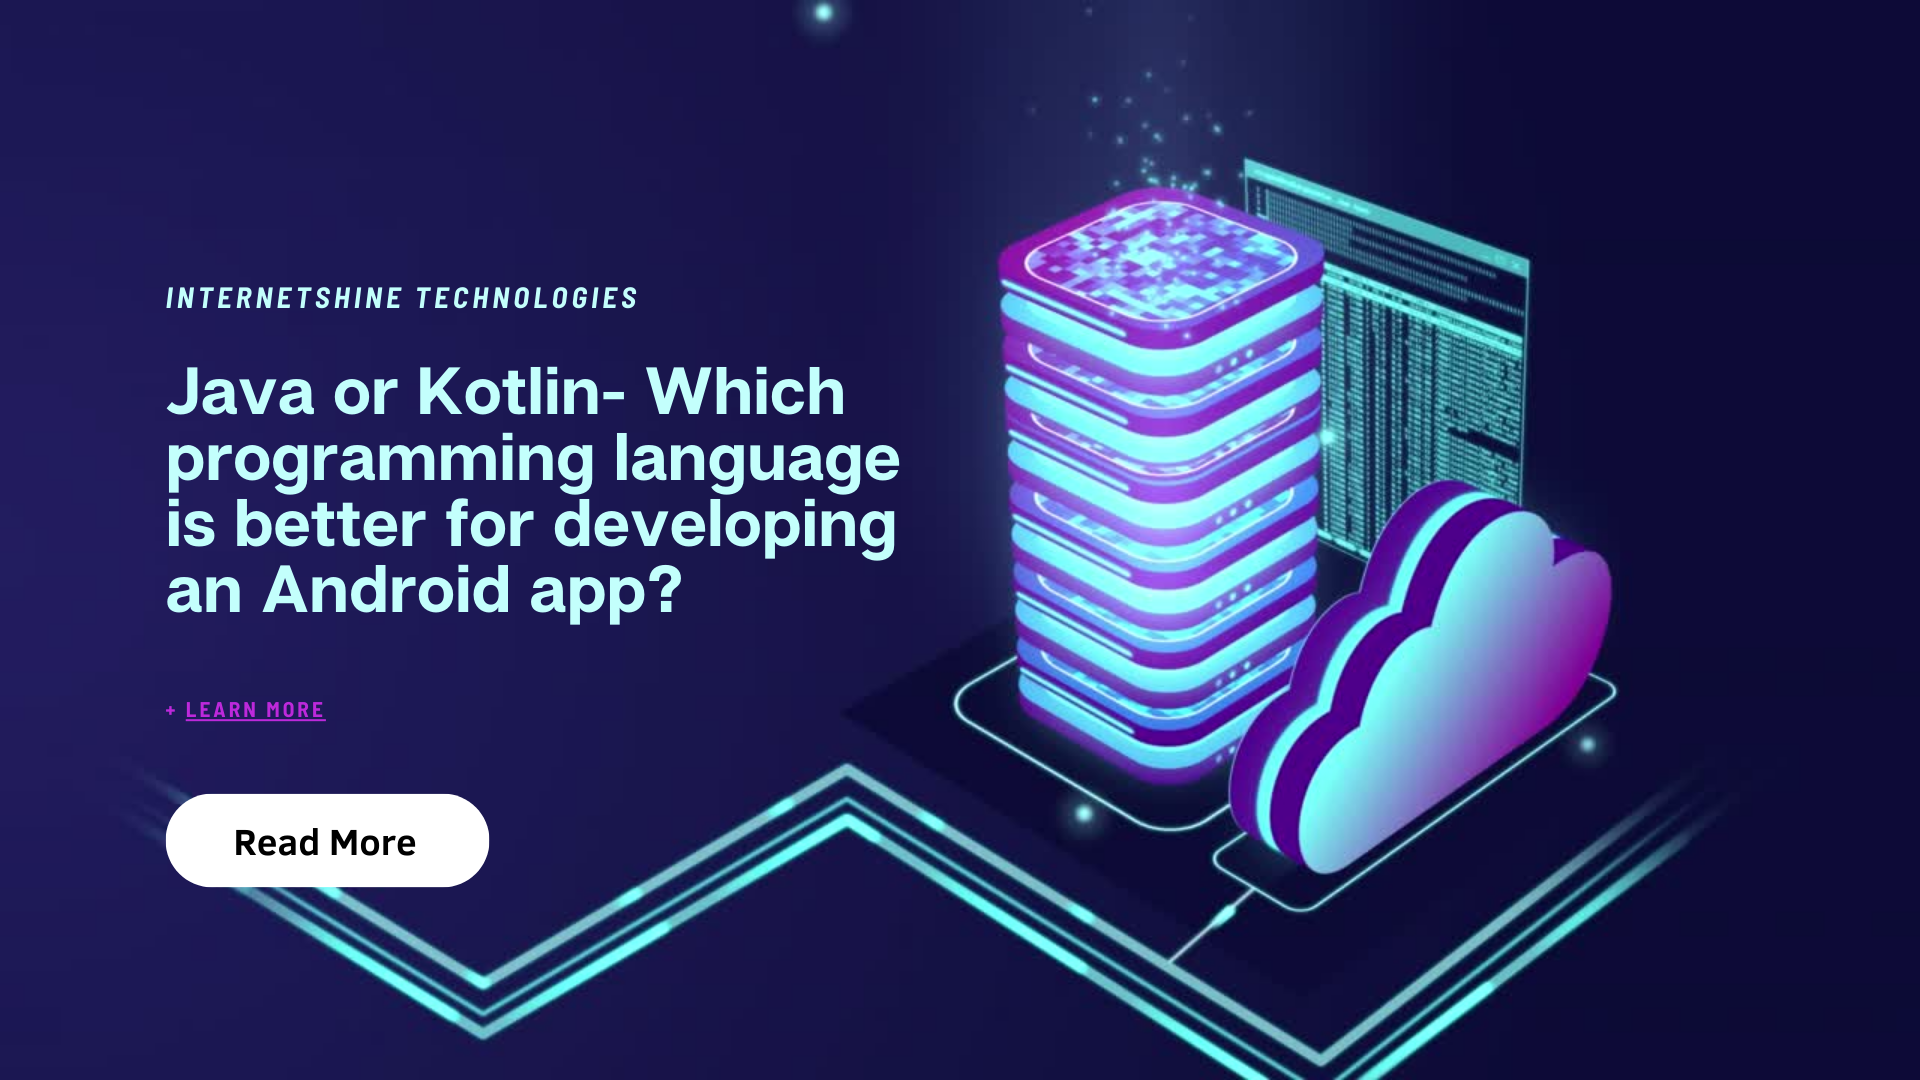 Java or Kotlin: Which Programming Language is Better for Developing an Android App?